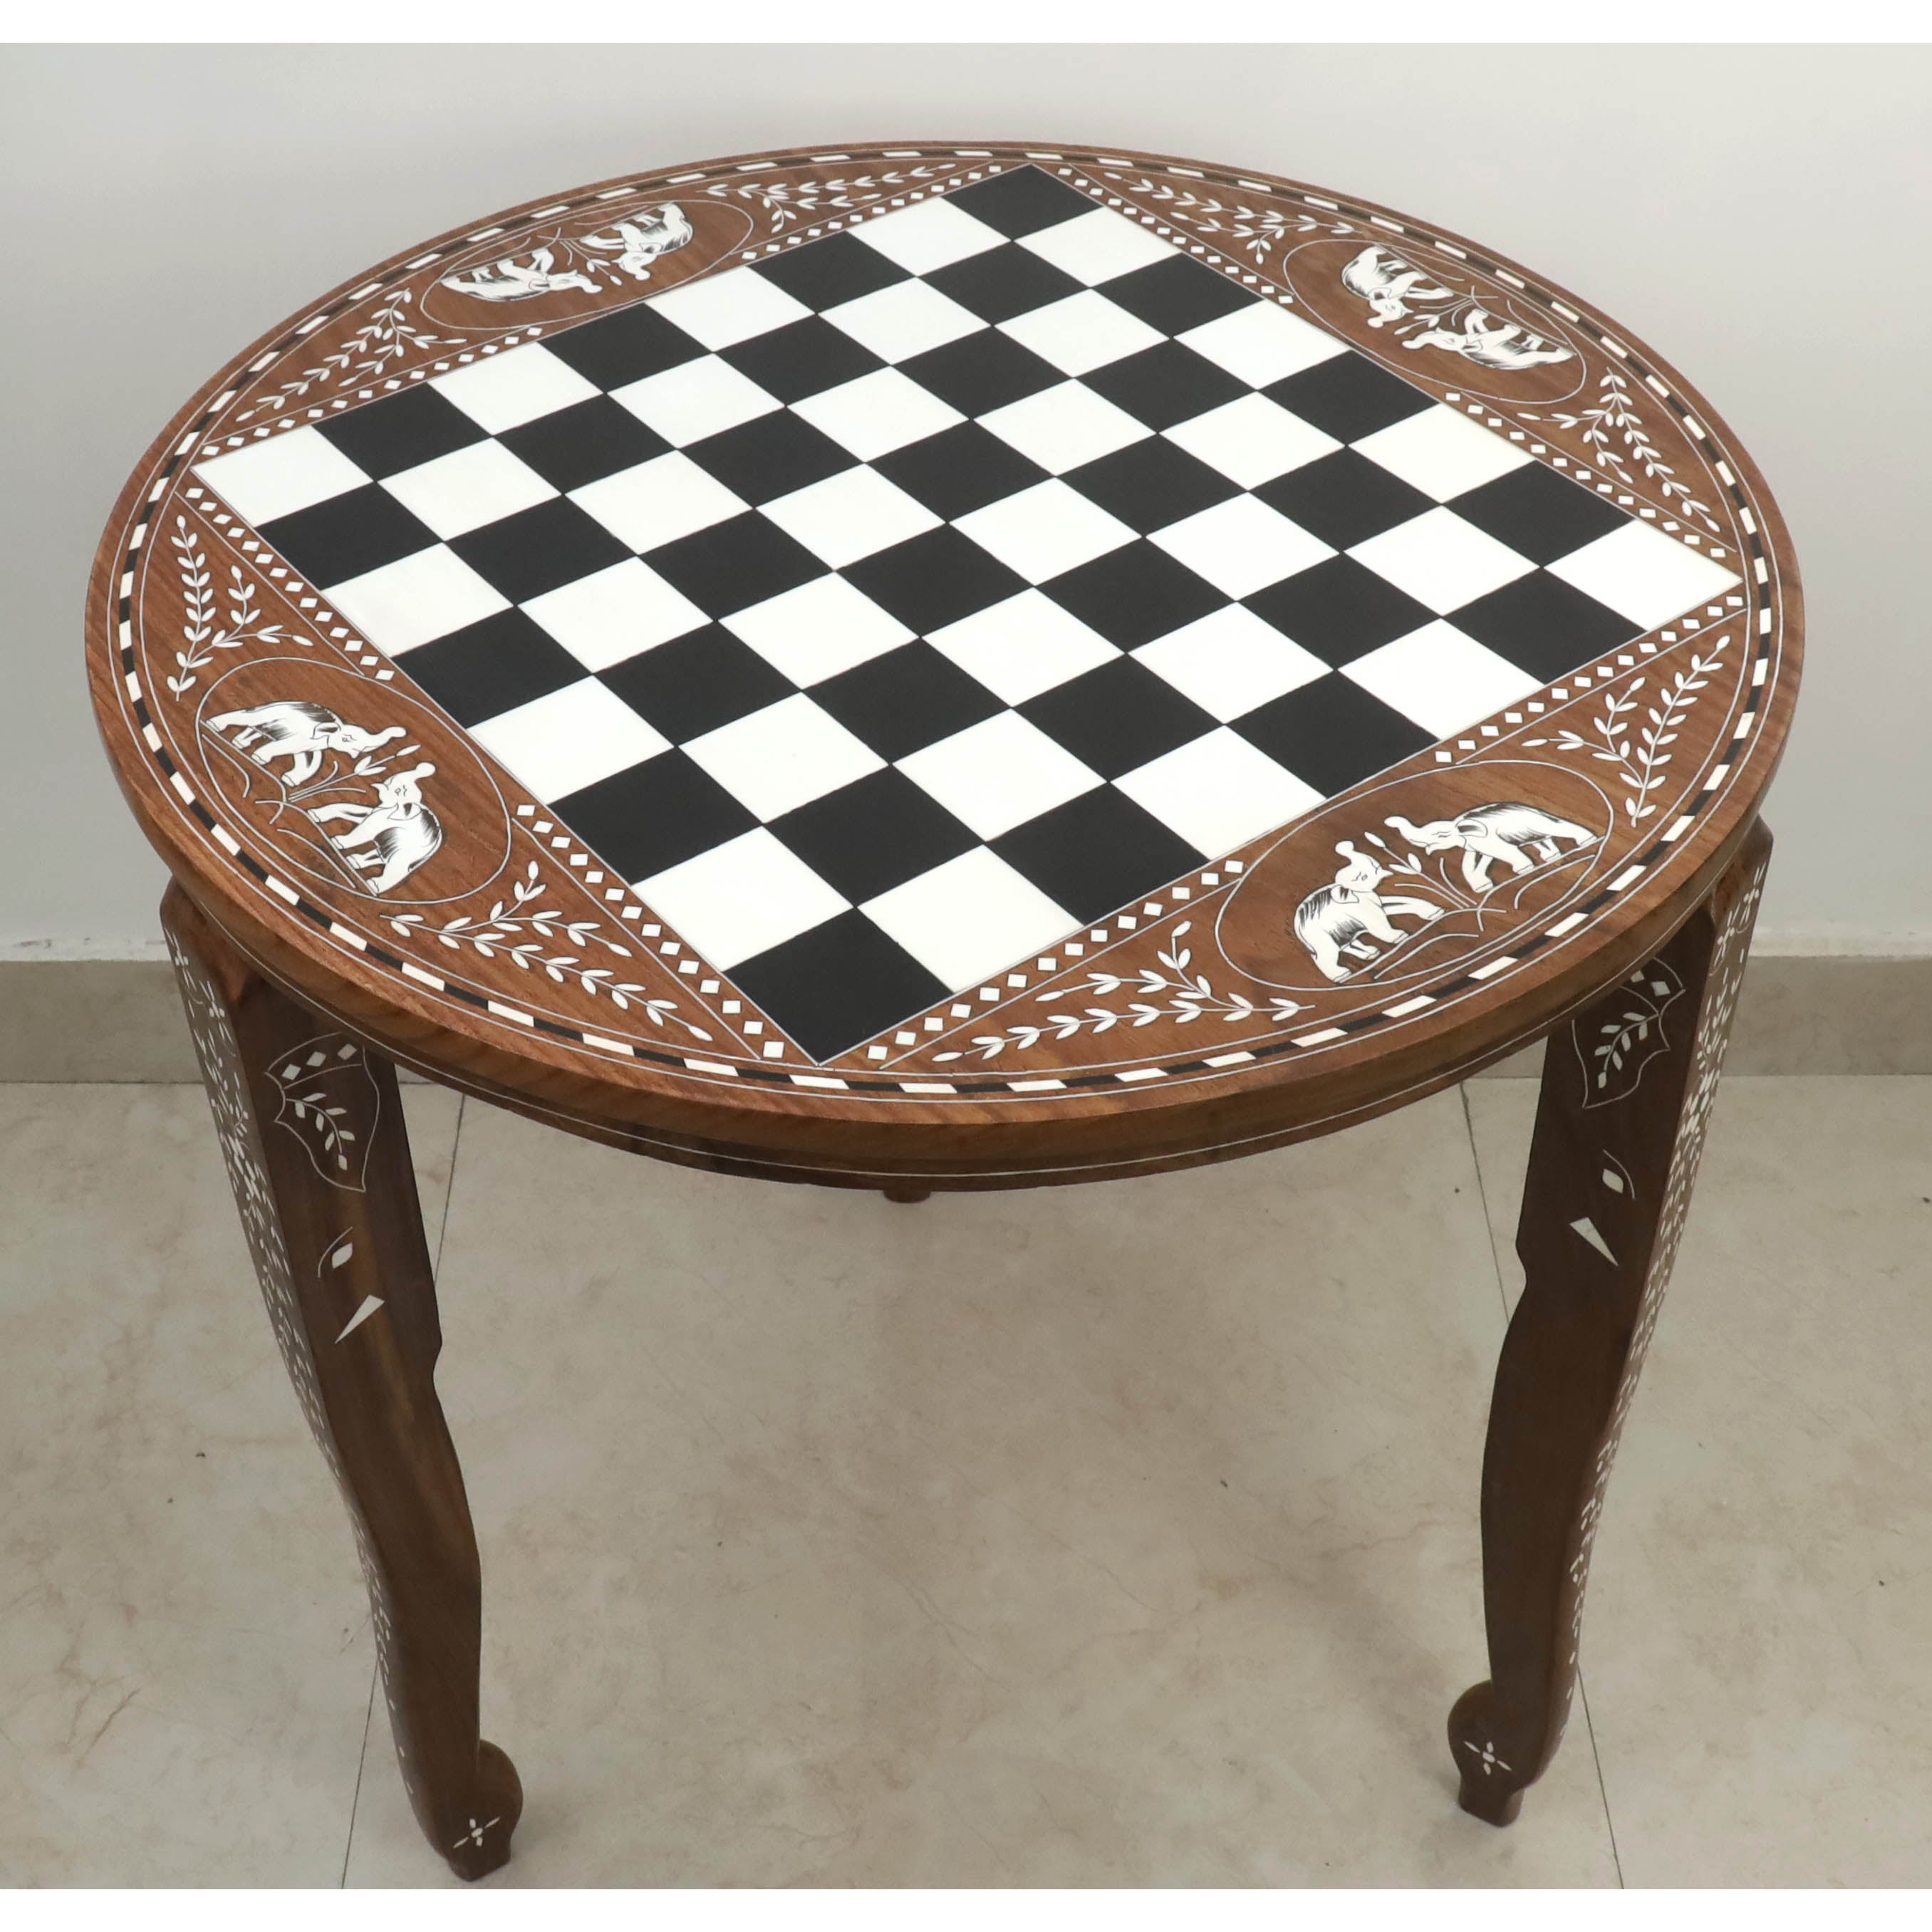 24" Boutique Luxury Round Chess Board Table - 25" High - Golden Rosewood & Acrylic